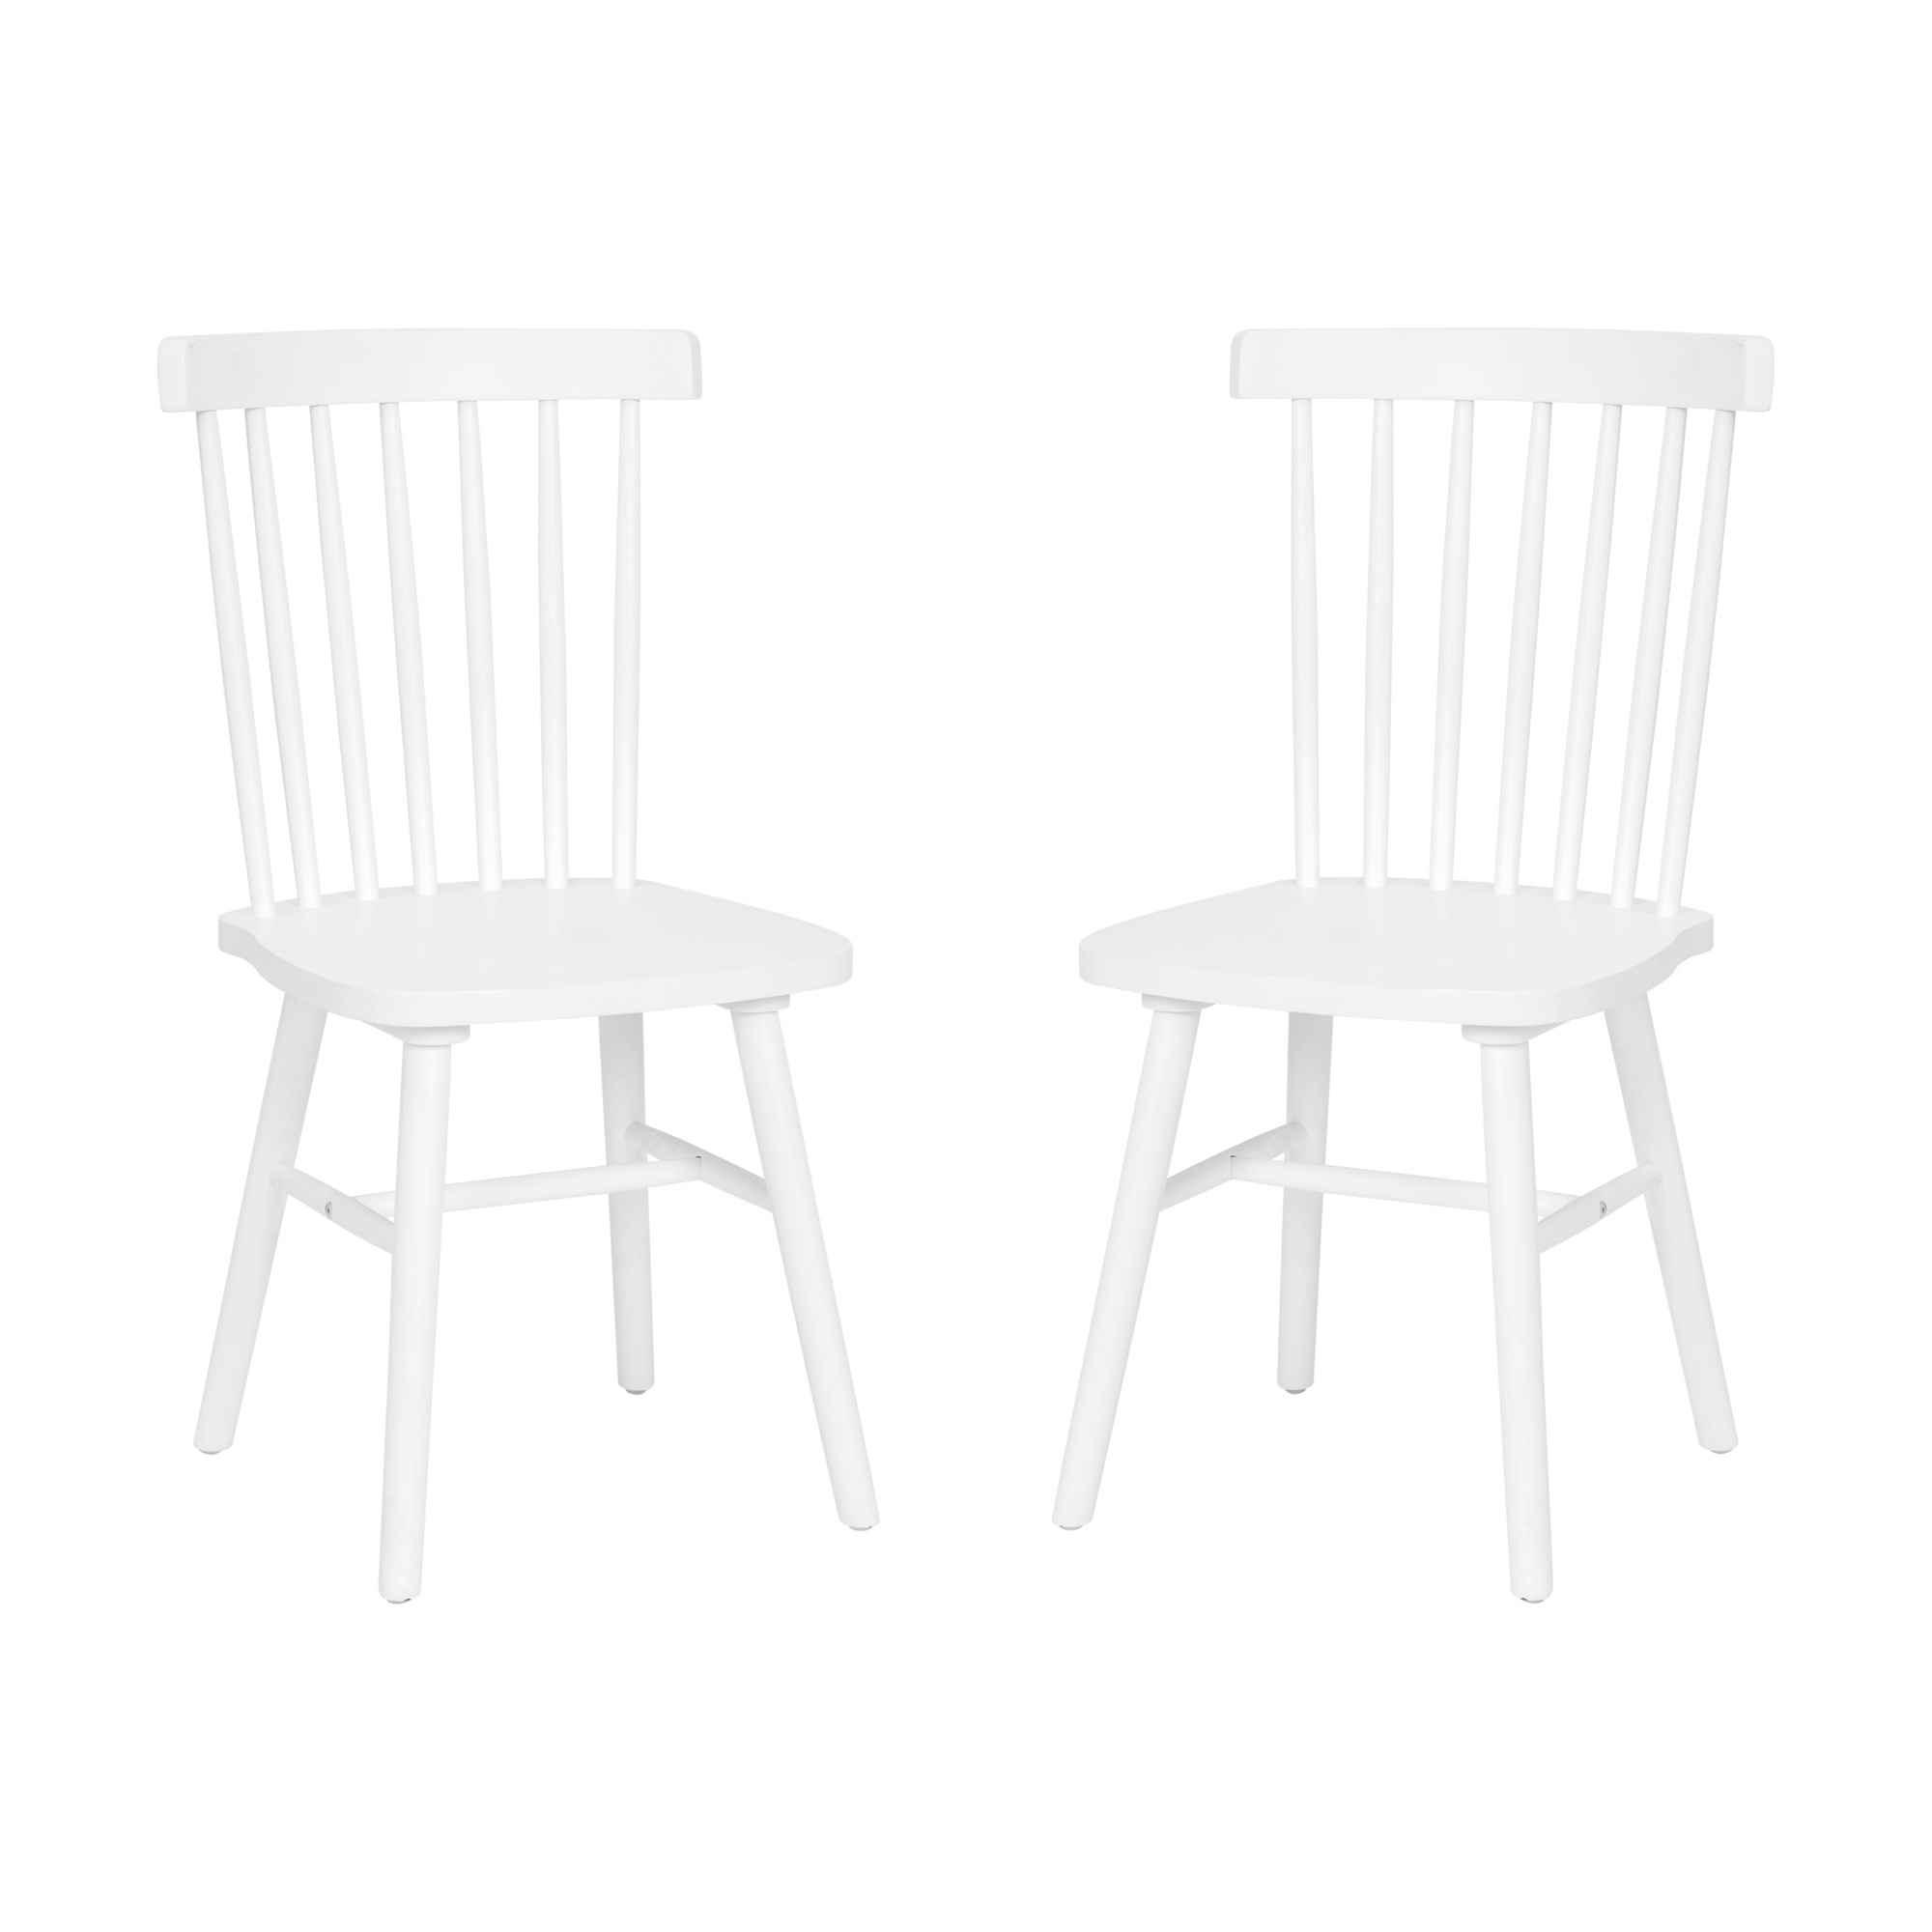 Flash Furniture, 2PK White Commercial Wooden Spindle Back Chairs, Primary Color White, Included (qty.) 1, Model ZH8101WRWH2